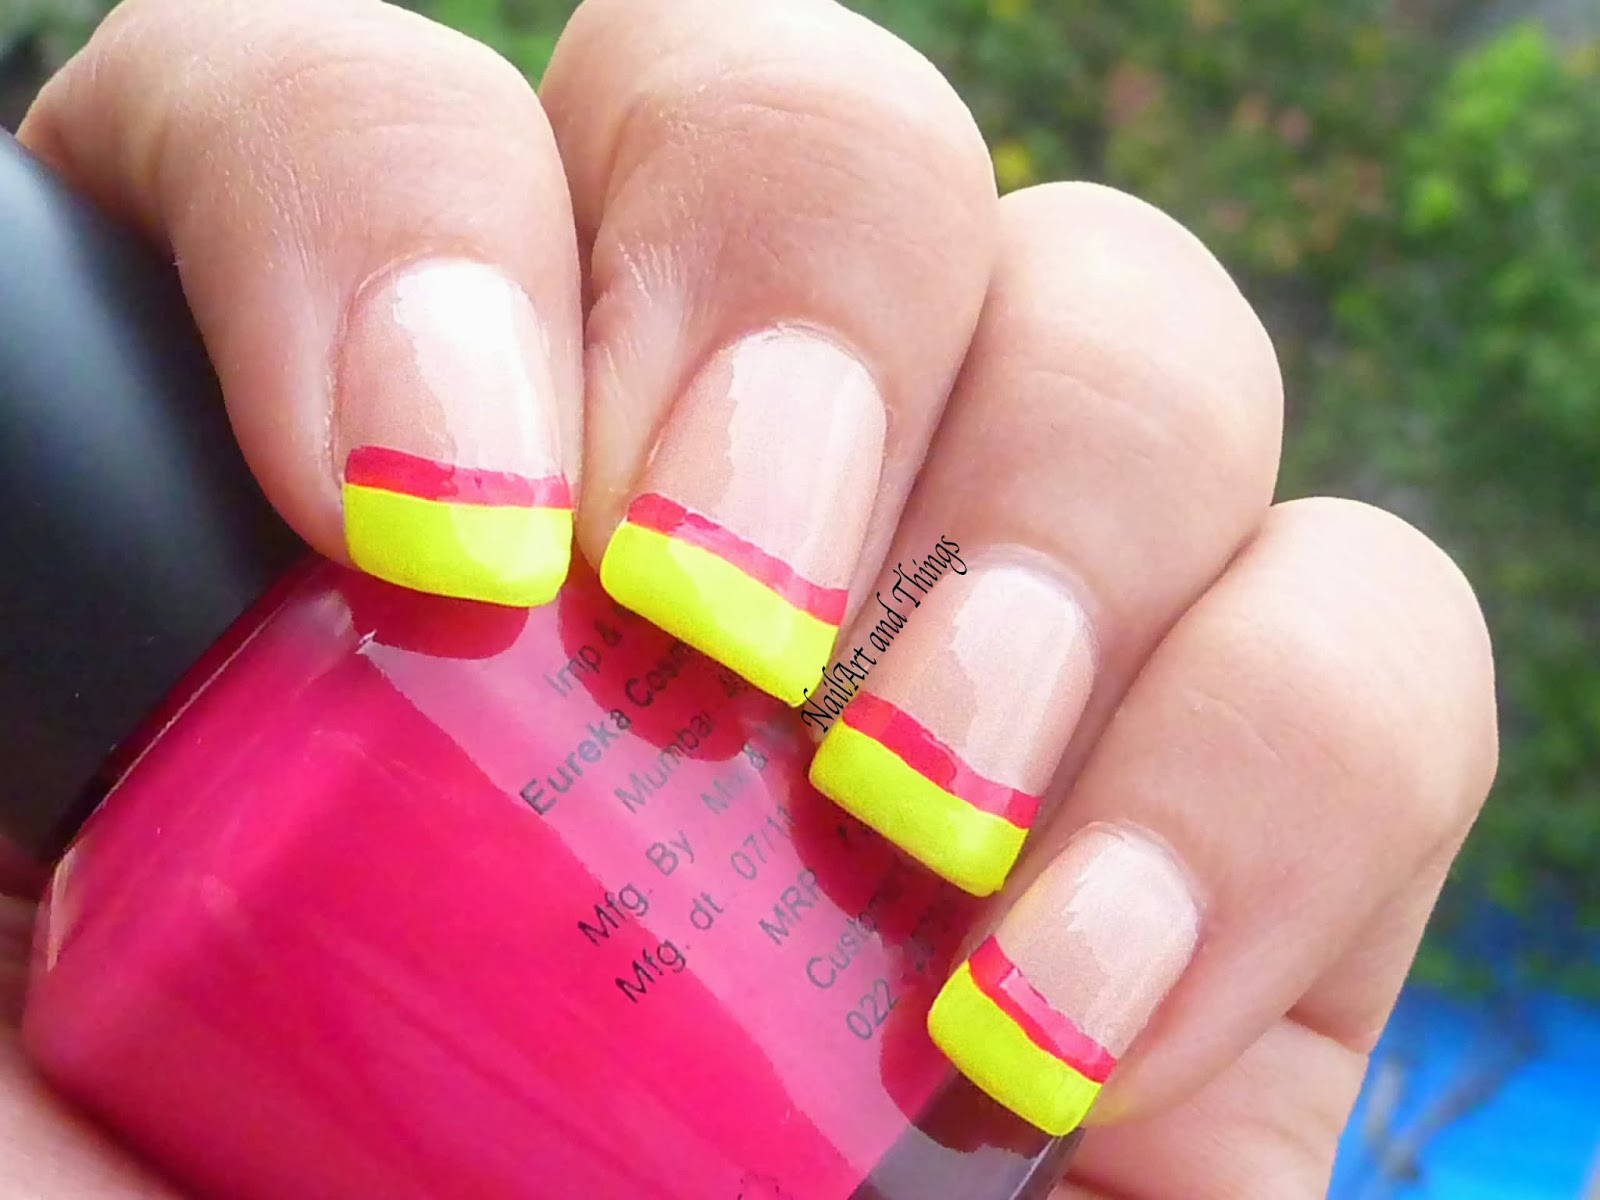 10. Neon French Tip Nail Art Tutorial - wide 4